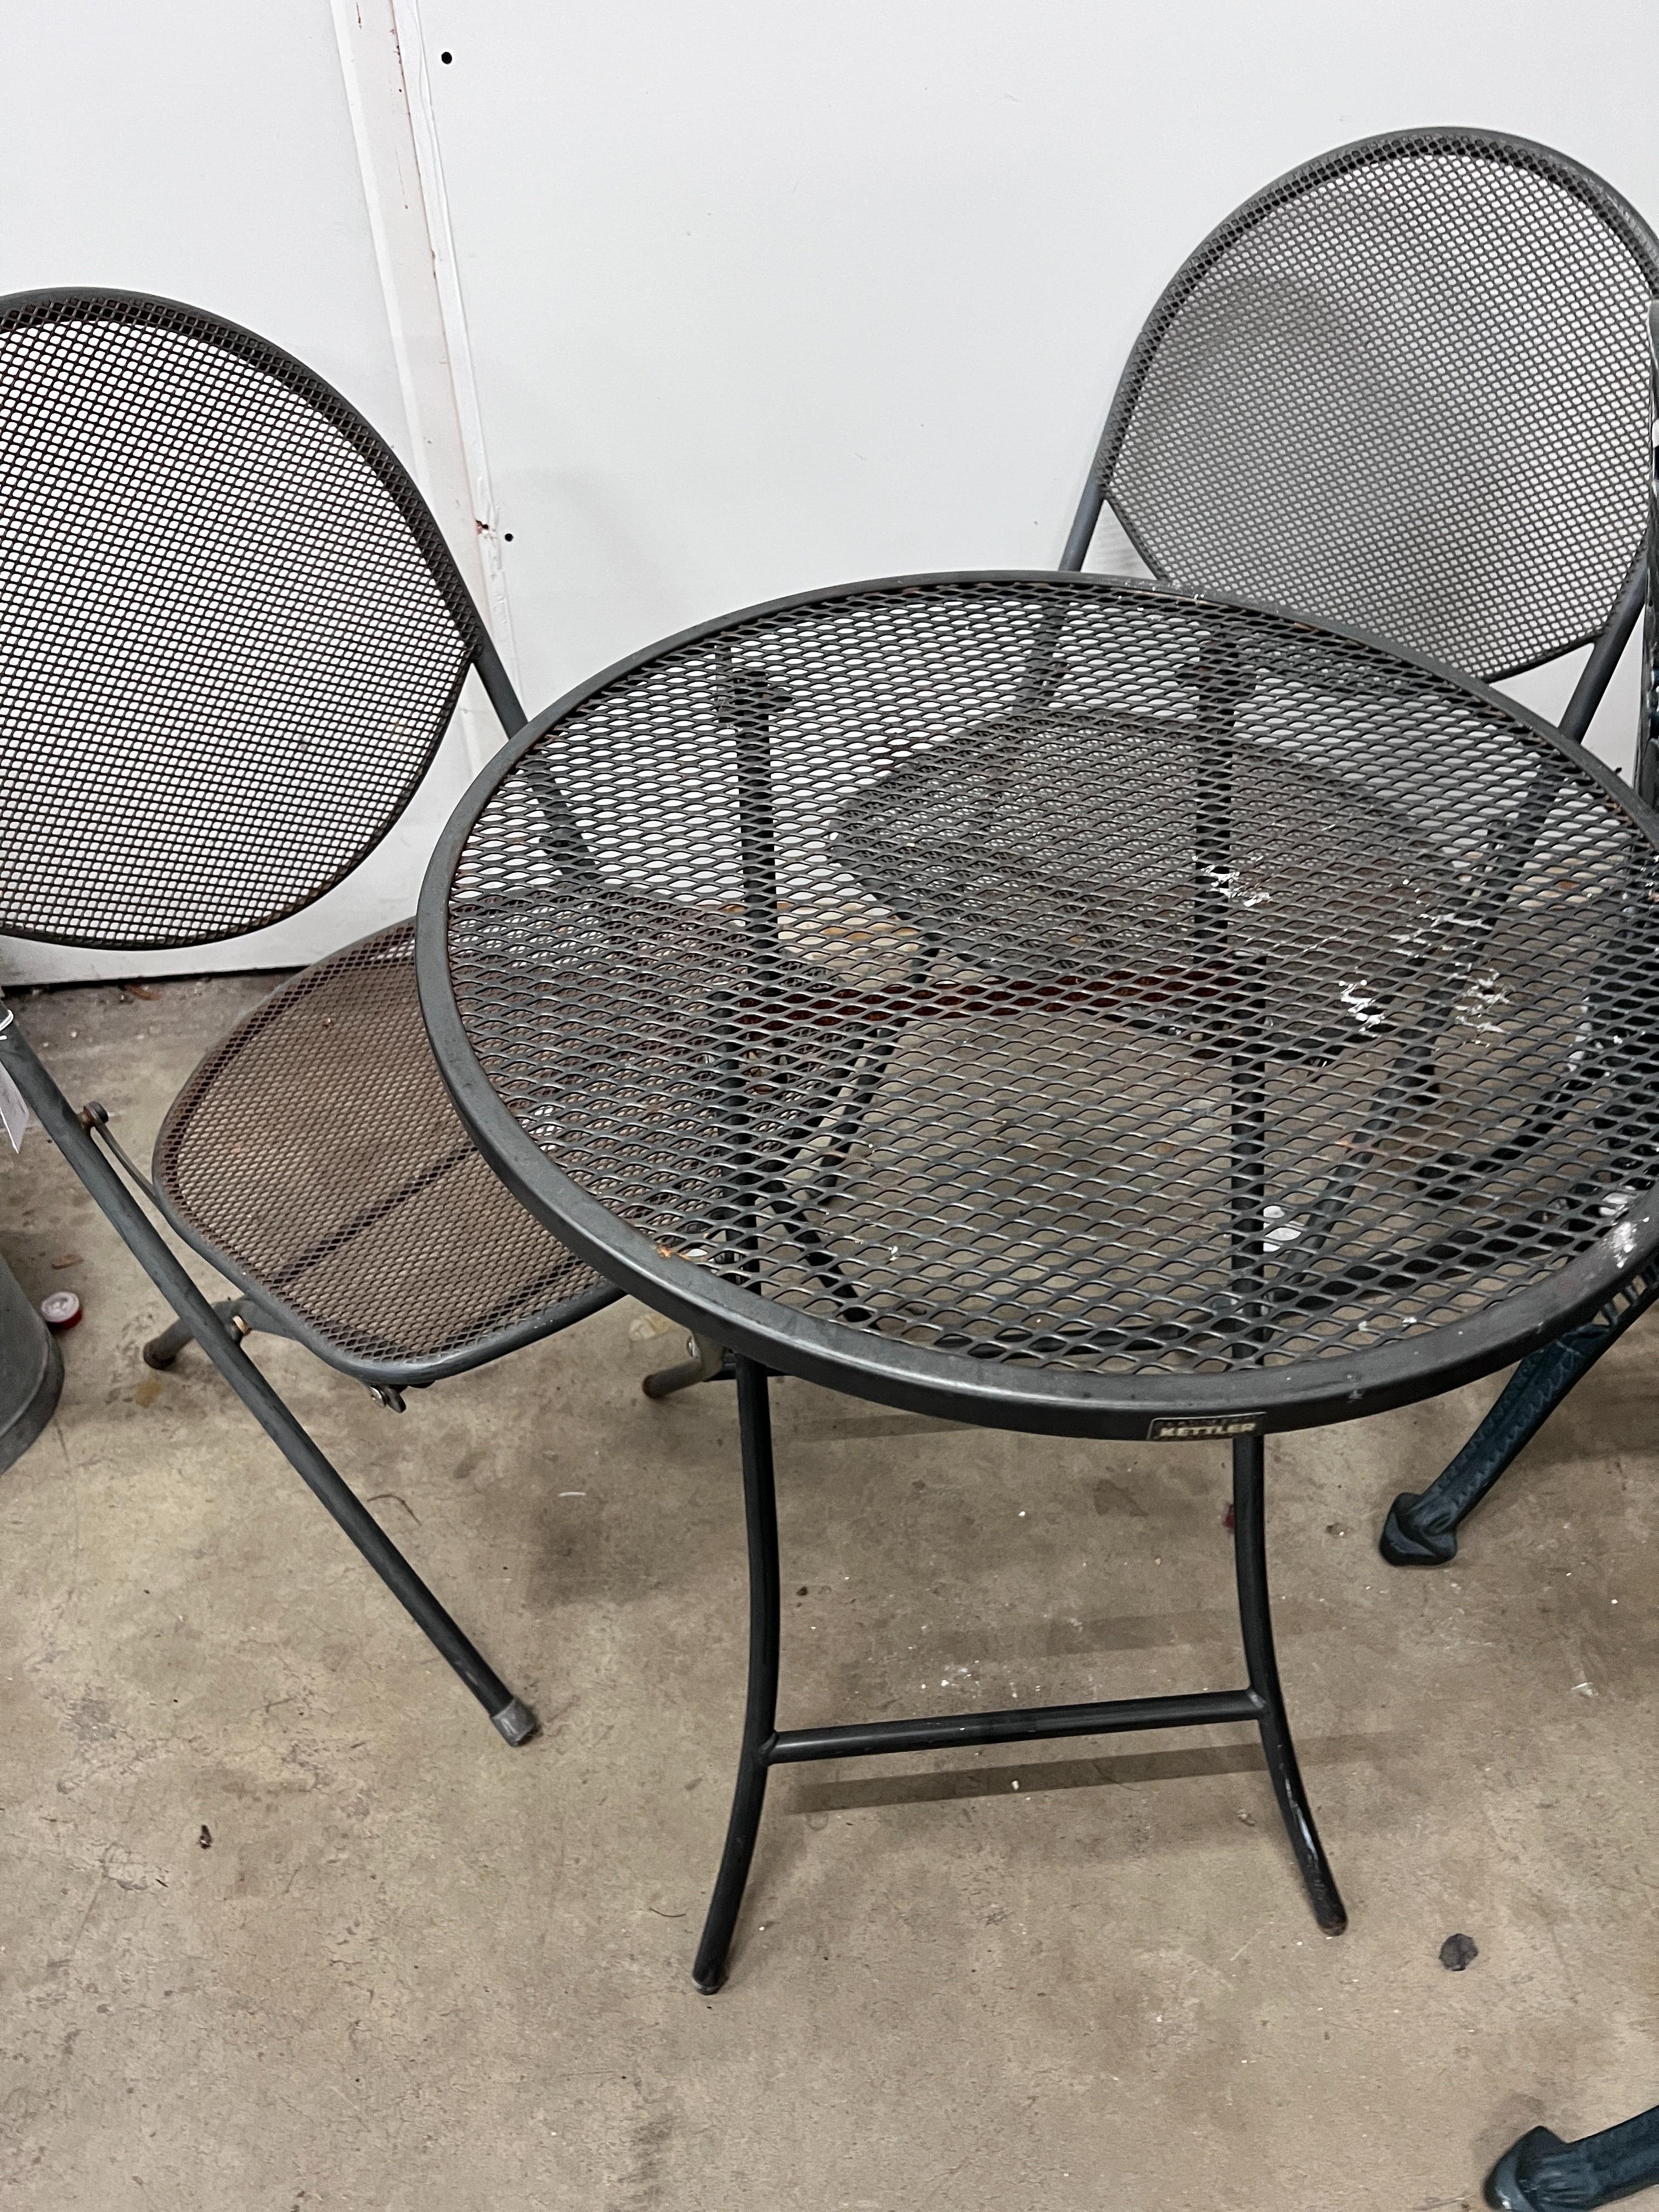 A Kettler circular garden table, diameter 62cm, height 72cm and two chairs